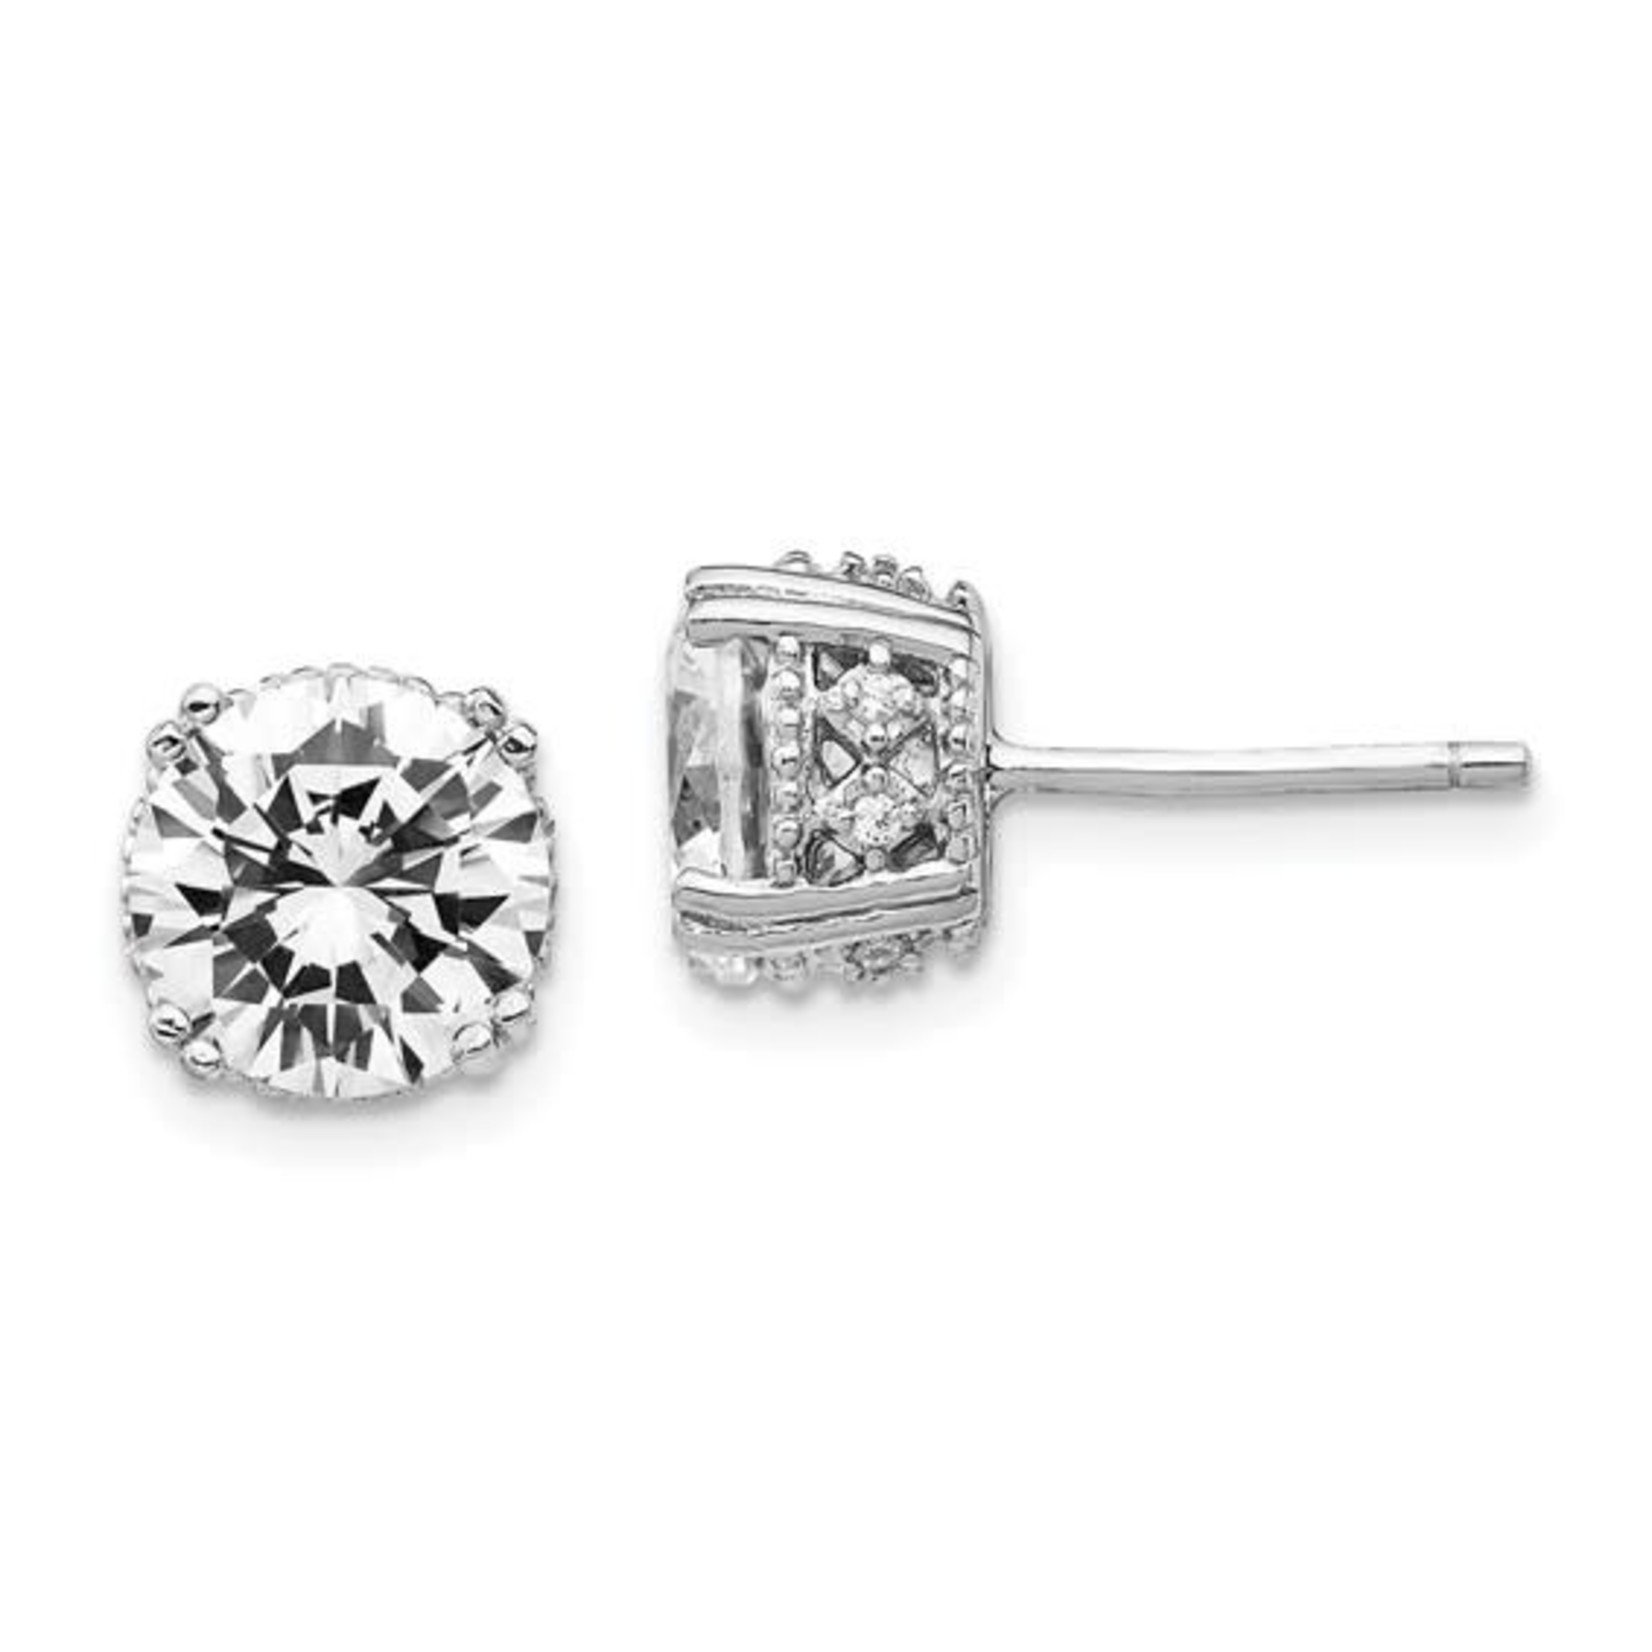 This Is Life Crown Jewels Sterling Silver Cz Earrings